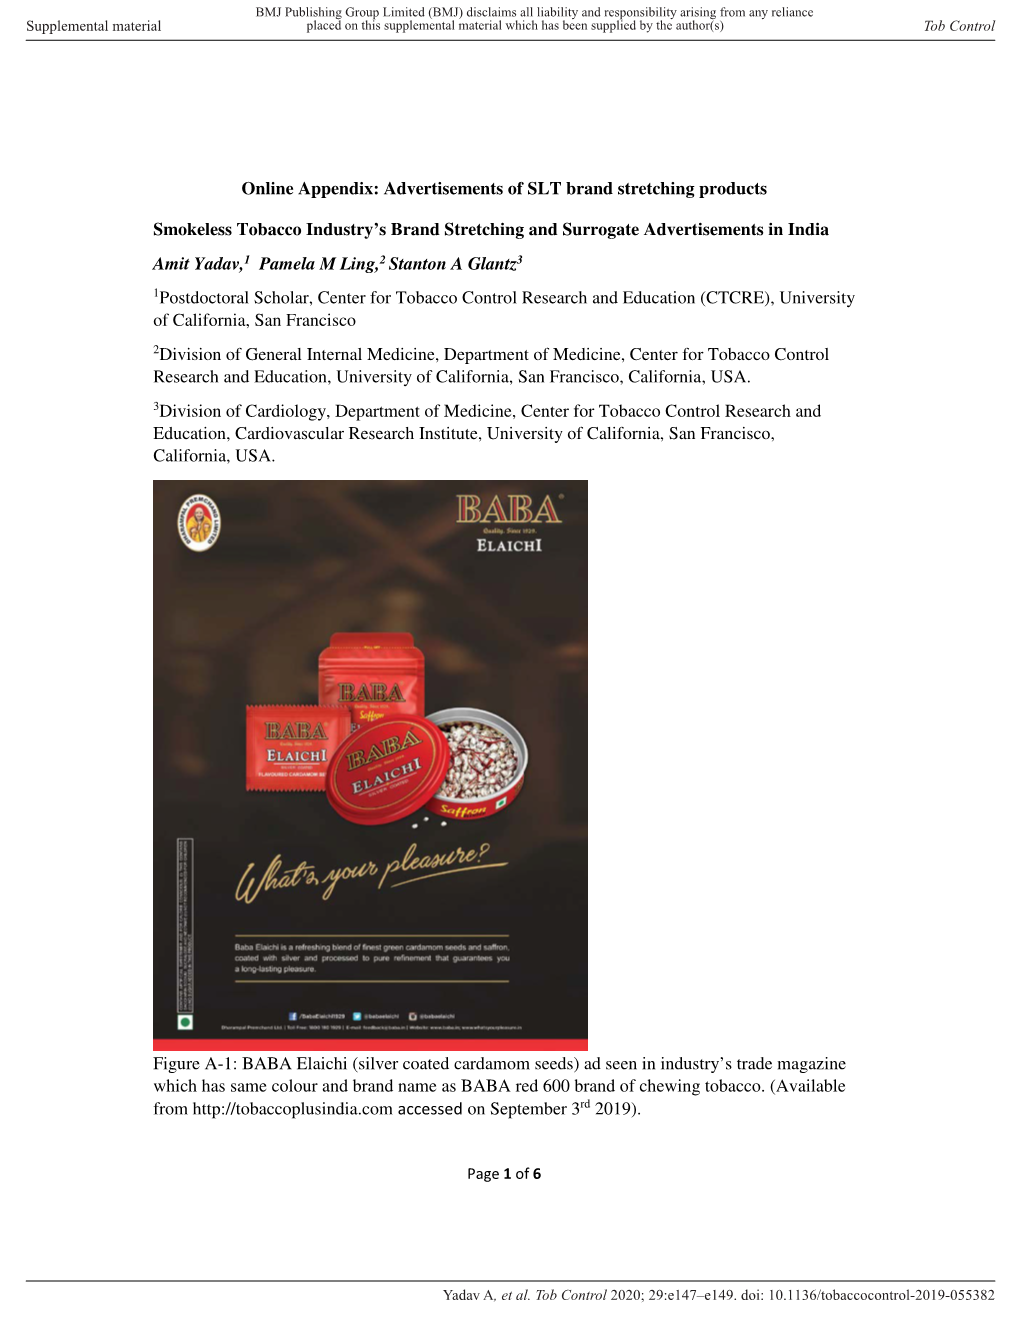 Online Appendix: Advertisements of SLT Brand Stretching Products